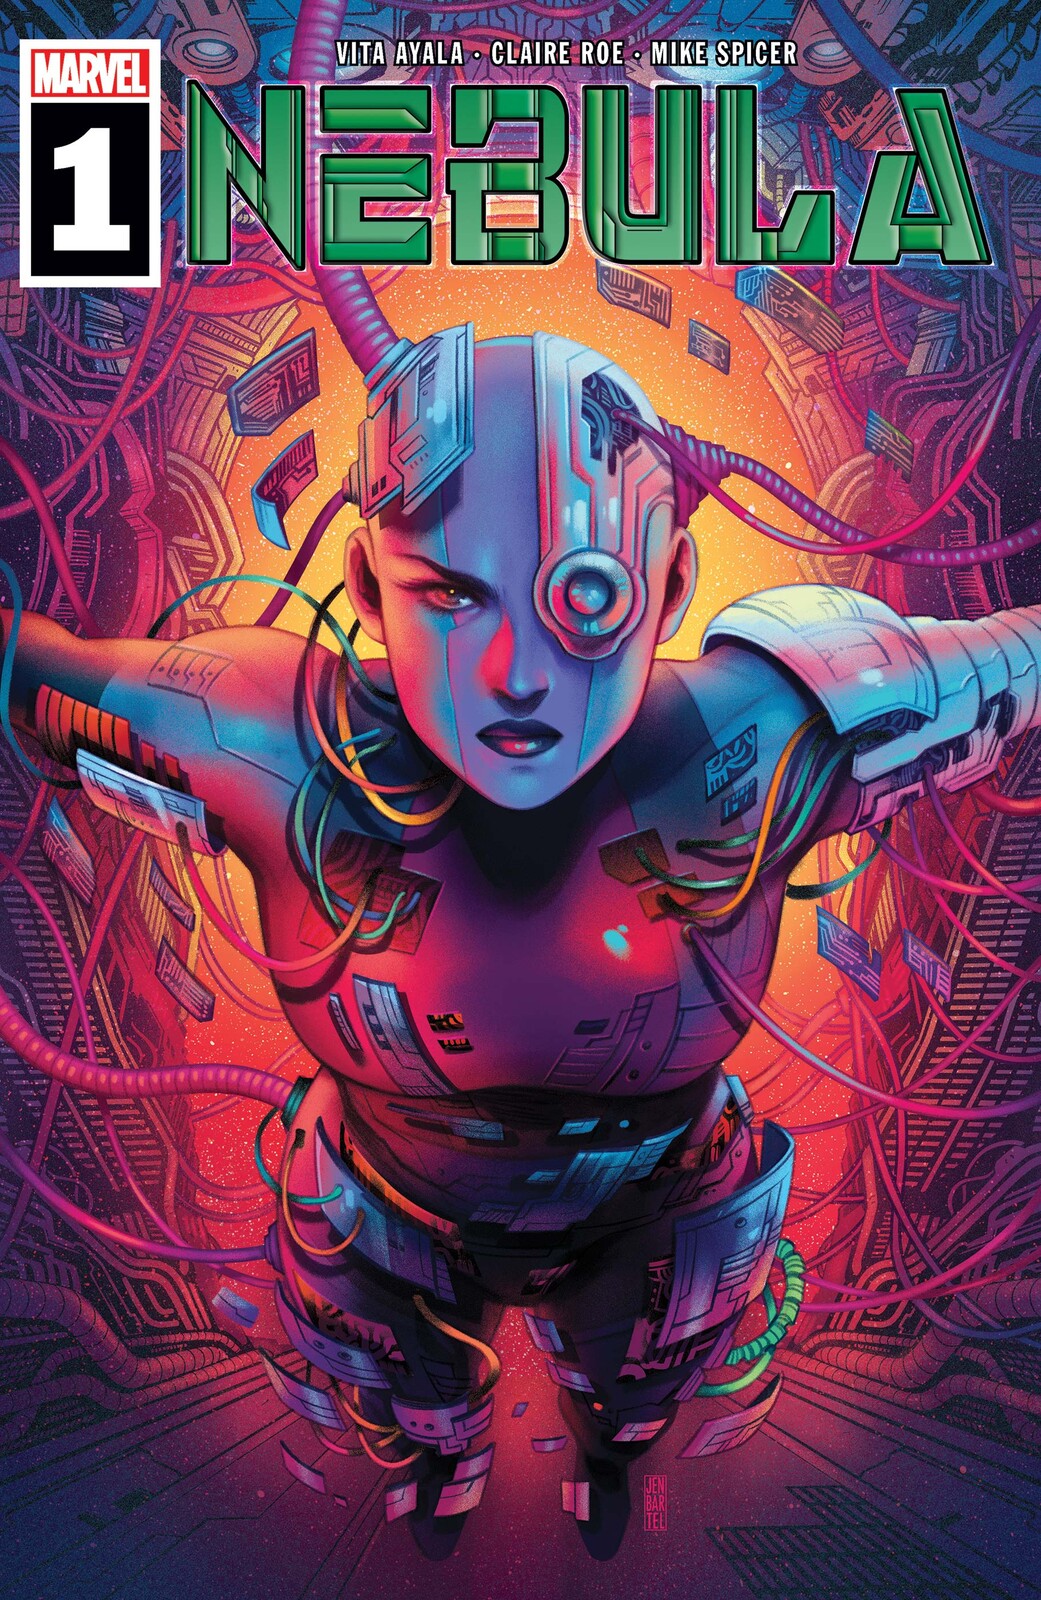 Nebula #1 Cover. Published by Marvel Entertainment